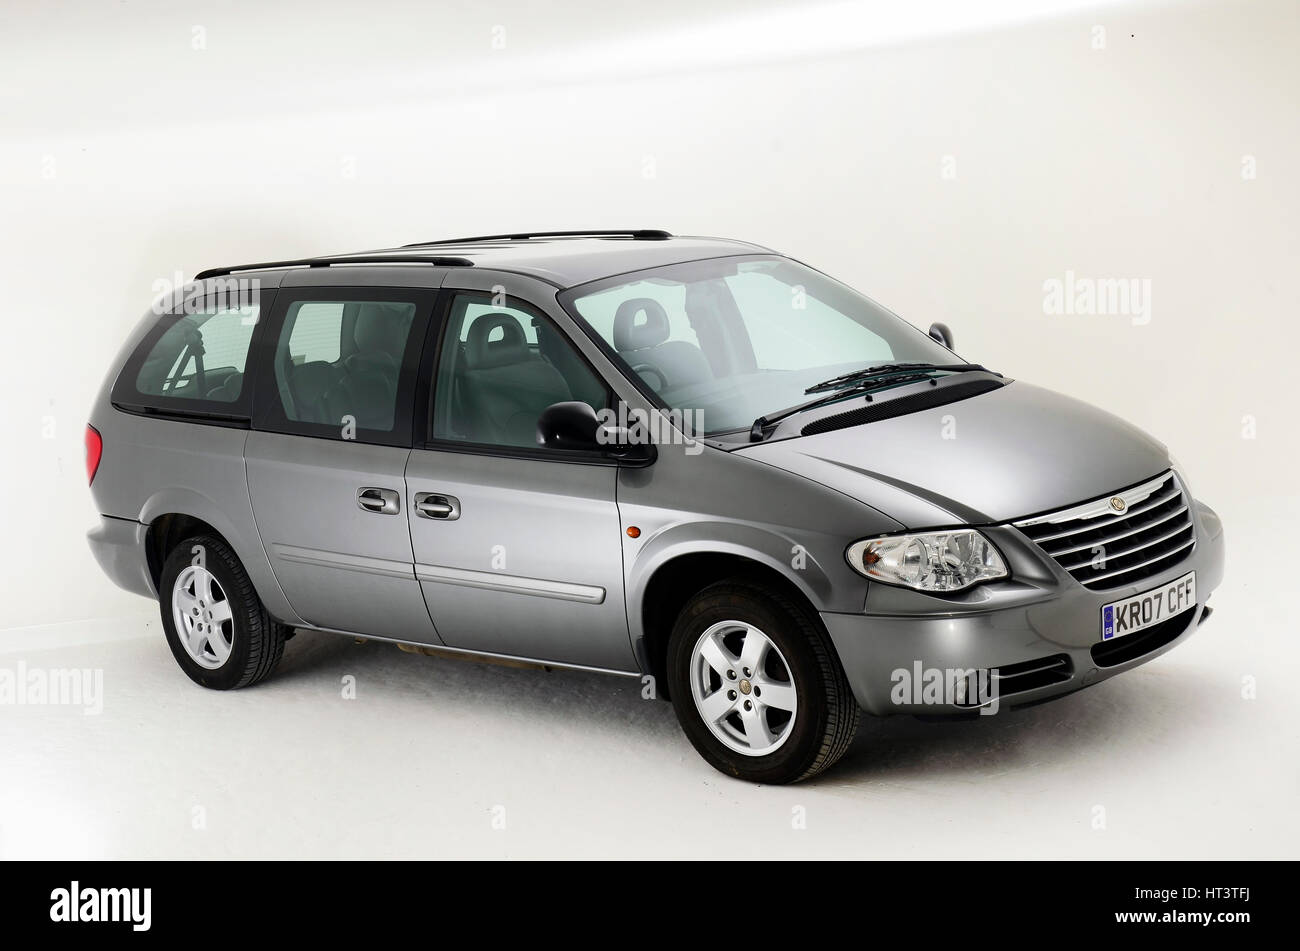 2007 Chrysler Grand Voyager Artist: Unknown. Stock Photo